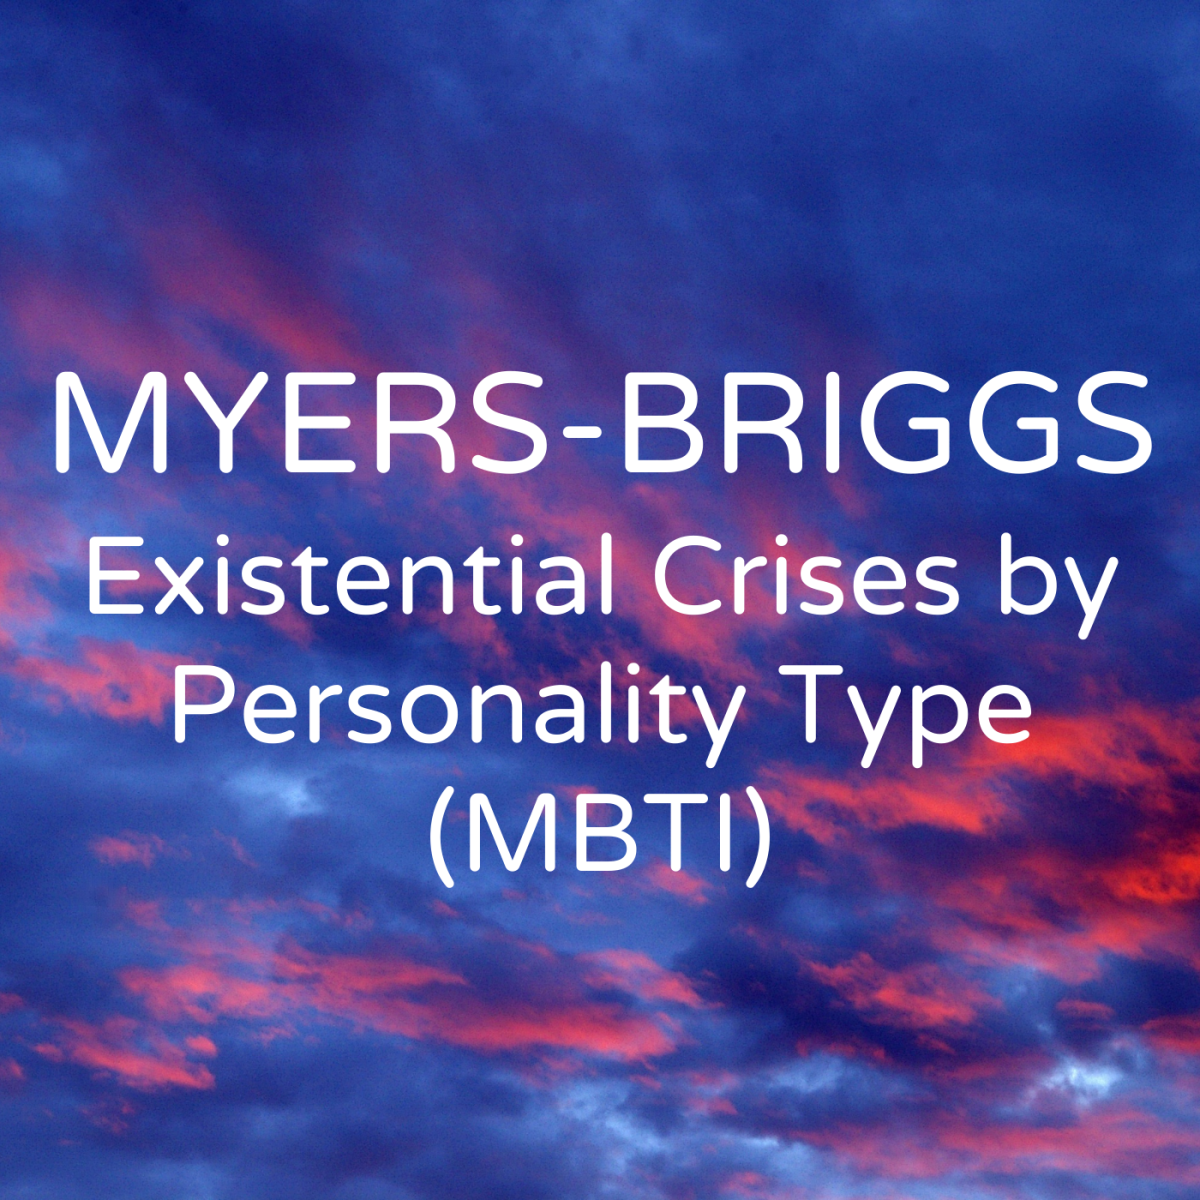 What's an ESFJ's existential crisis? How about an INTJ's? Explore crises by personality type.